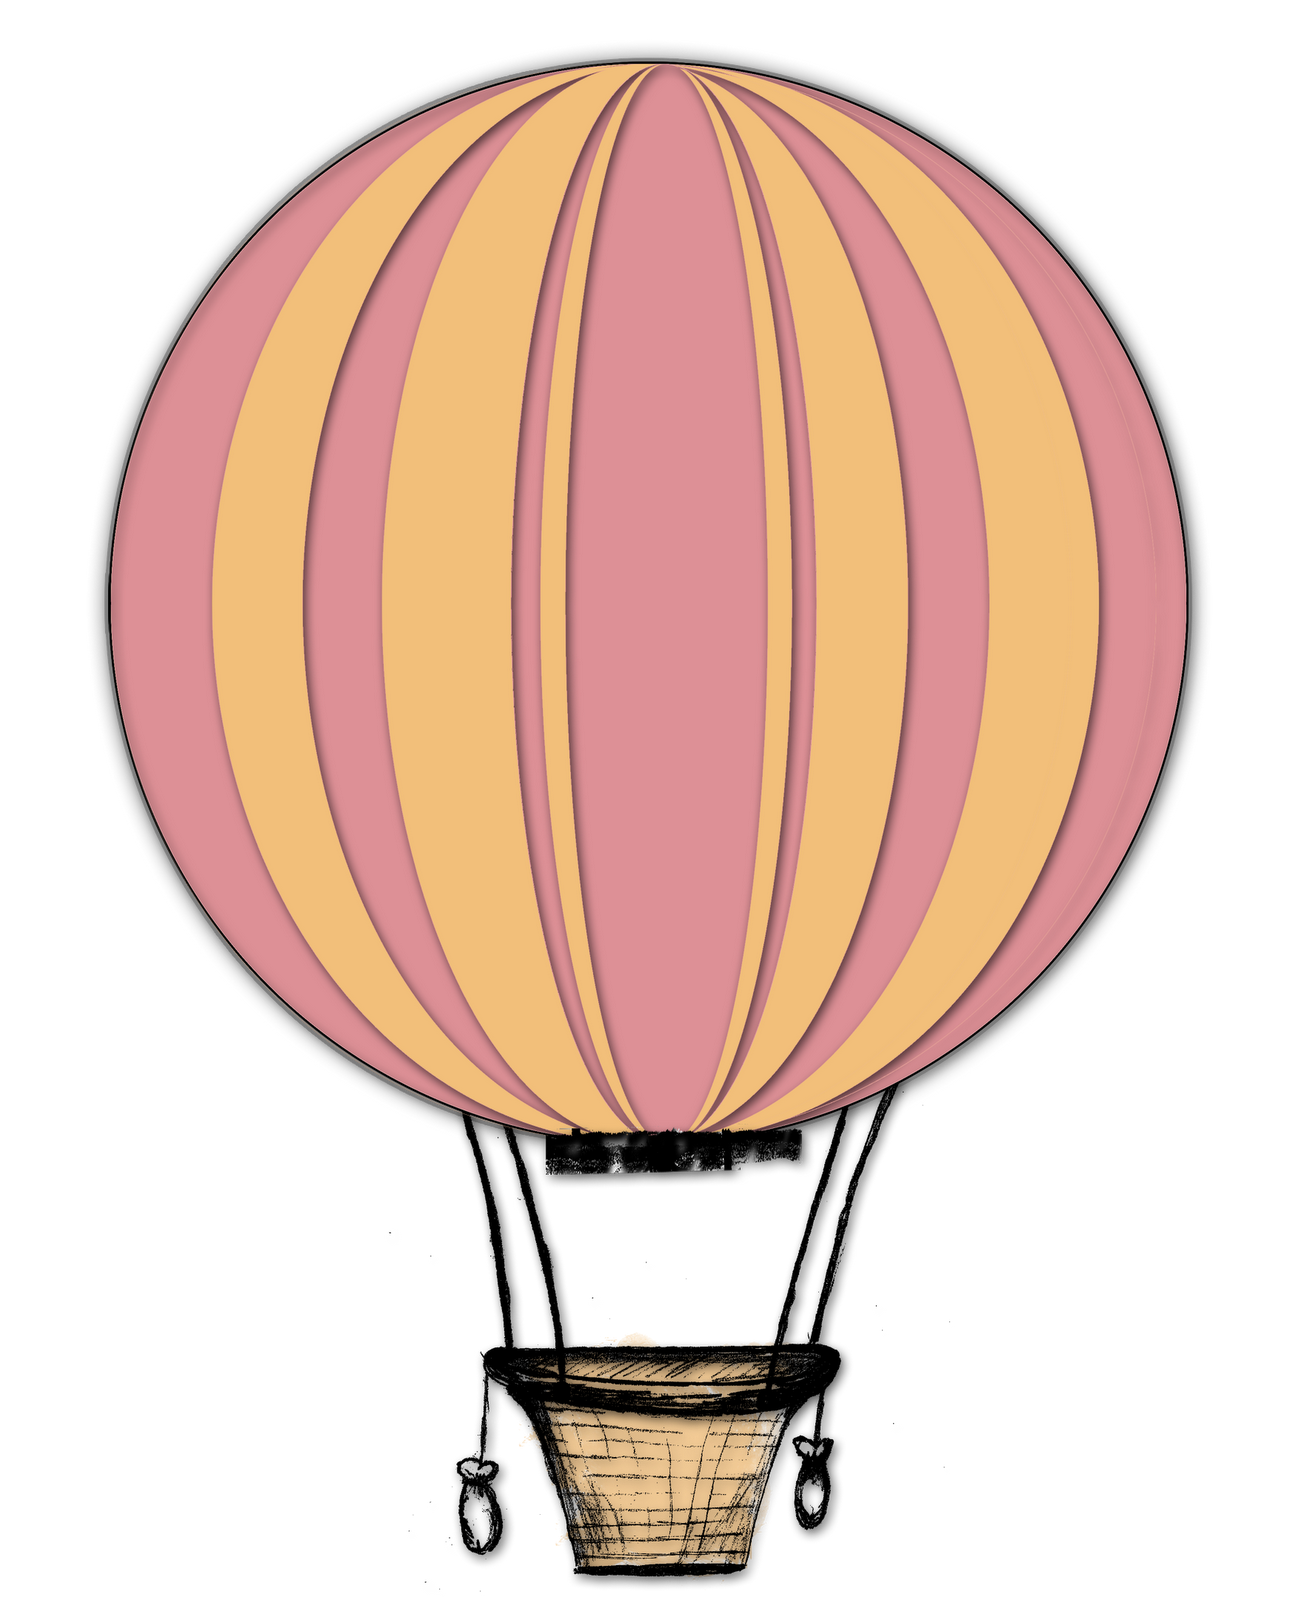 hot-air-balloon-basket-free-download-on-clipartmag